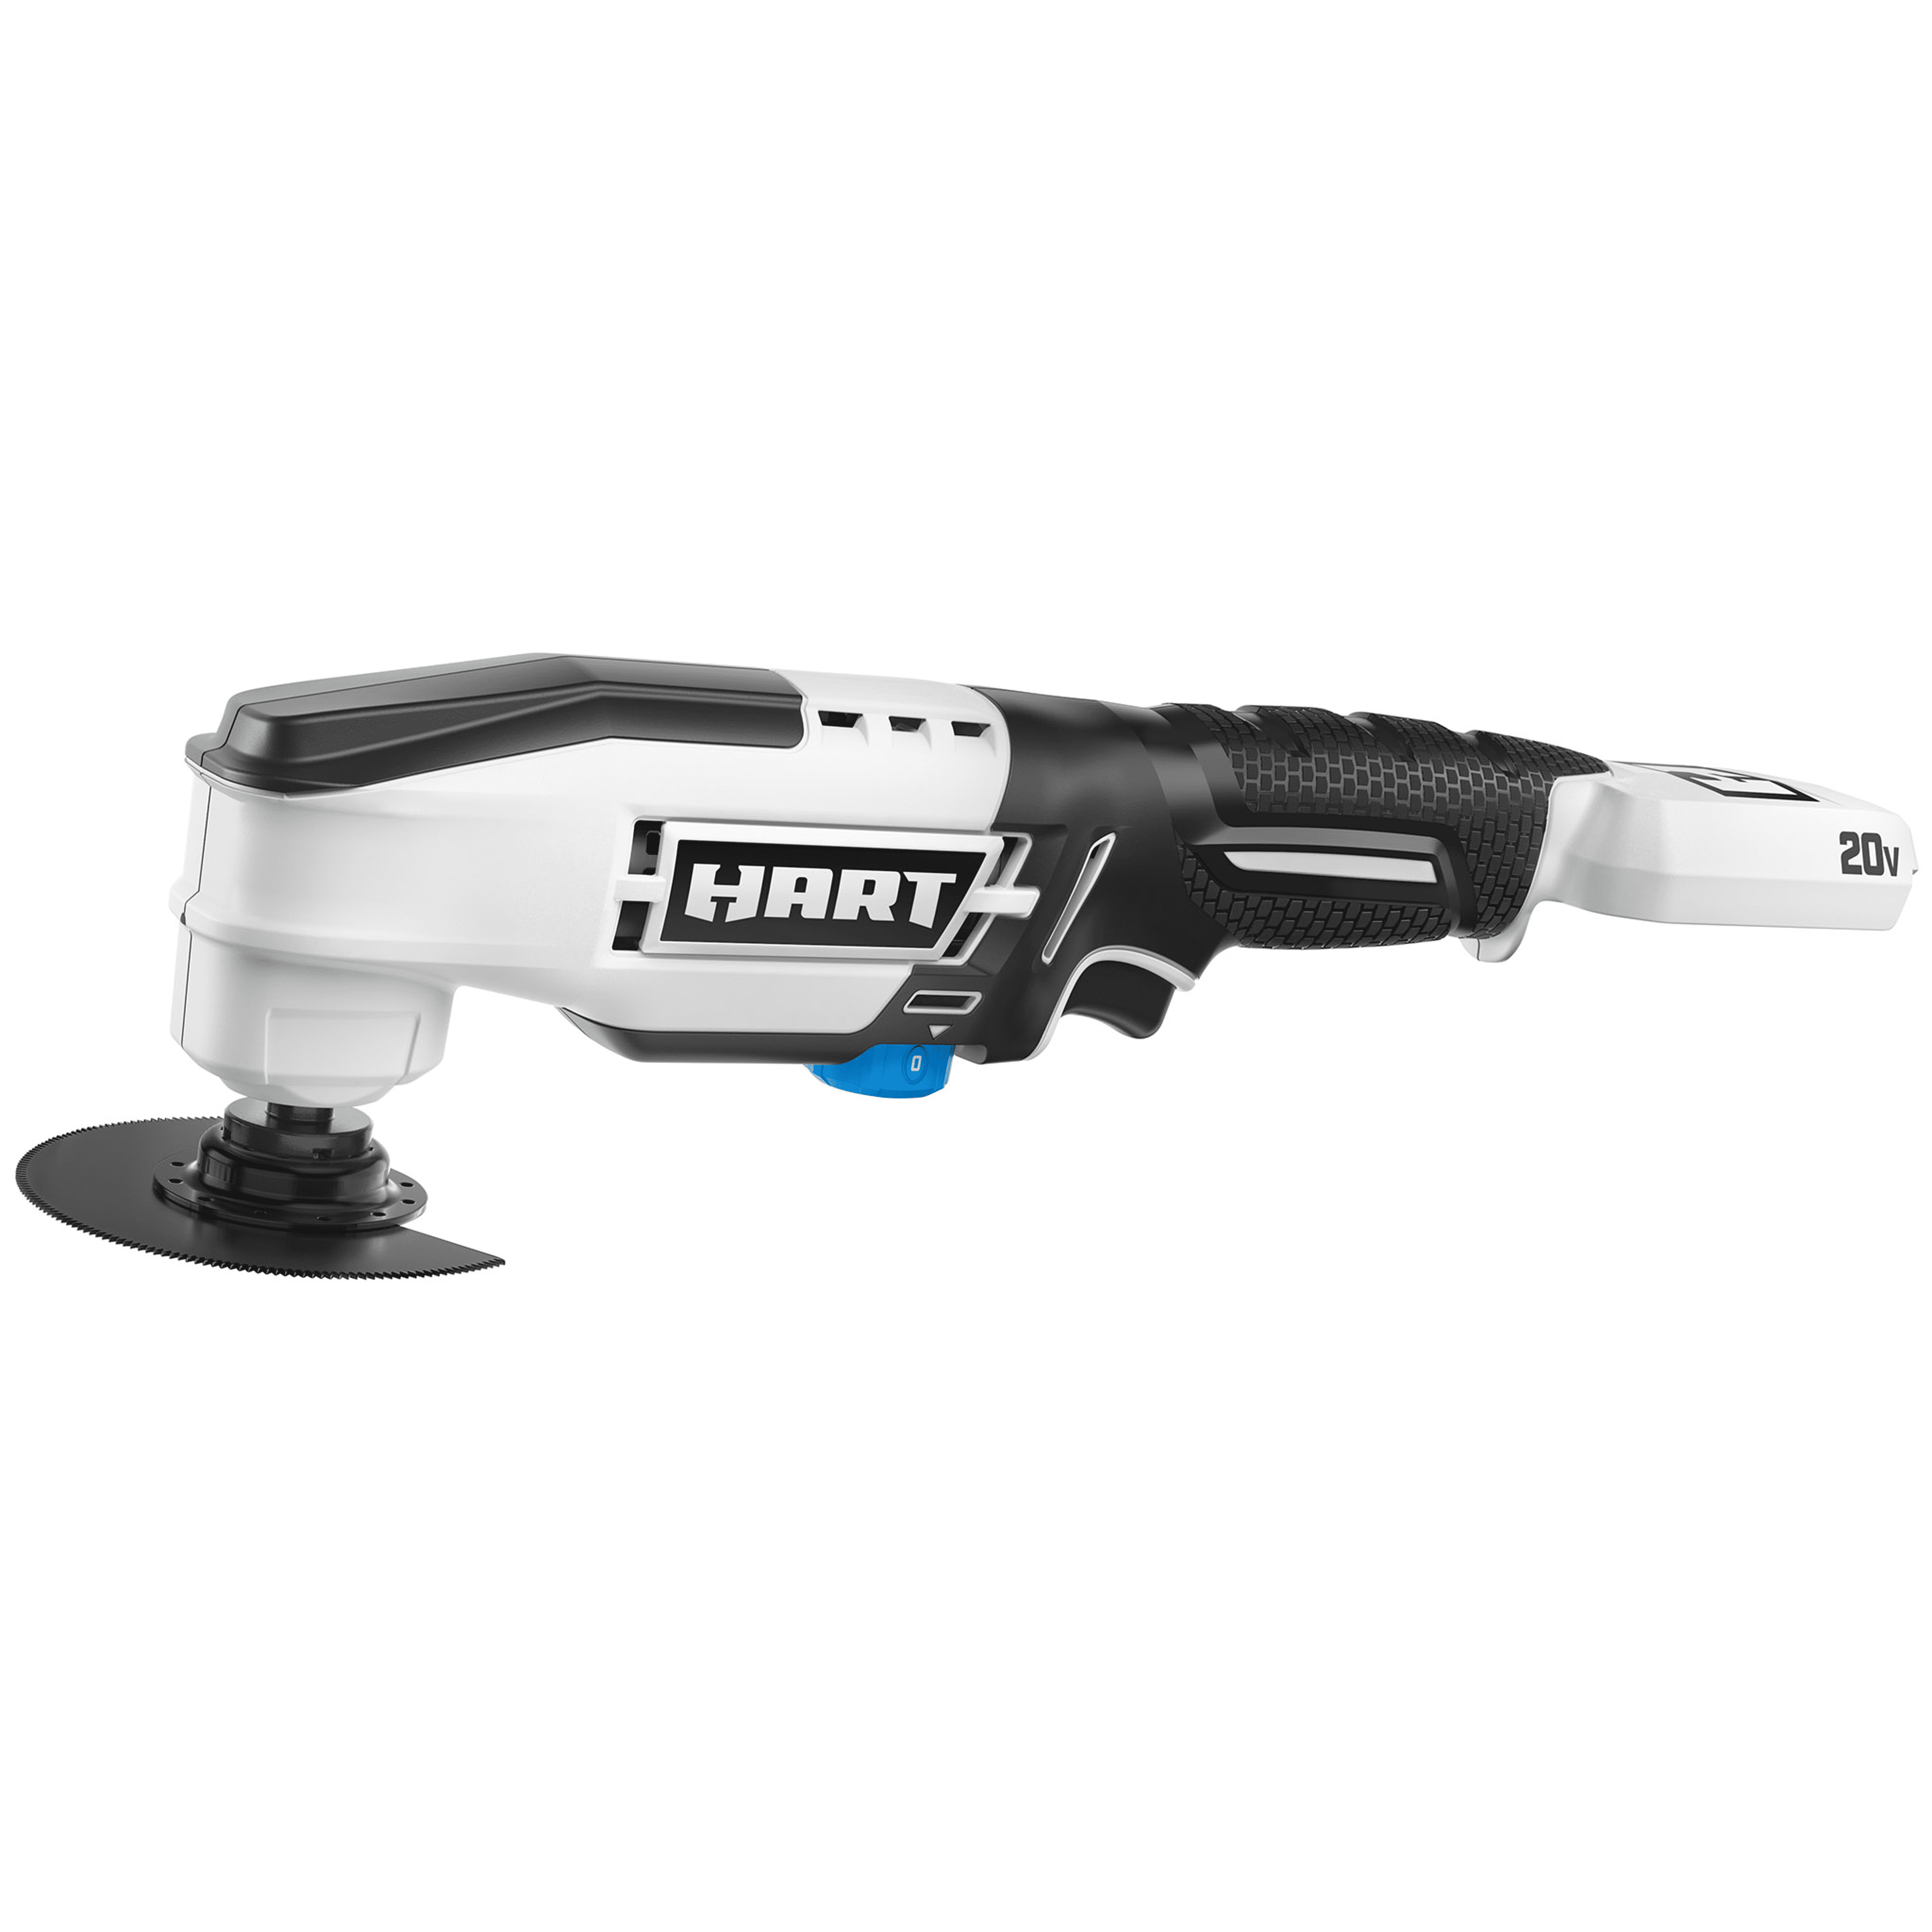 HART 20-Volt Cordless Oscillating Multi-Tool with Accessories (Battery Not Included) - 2